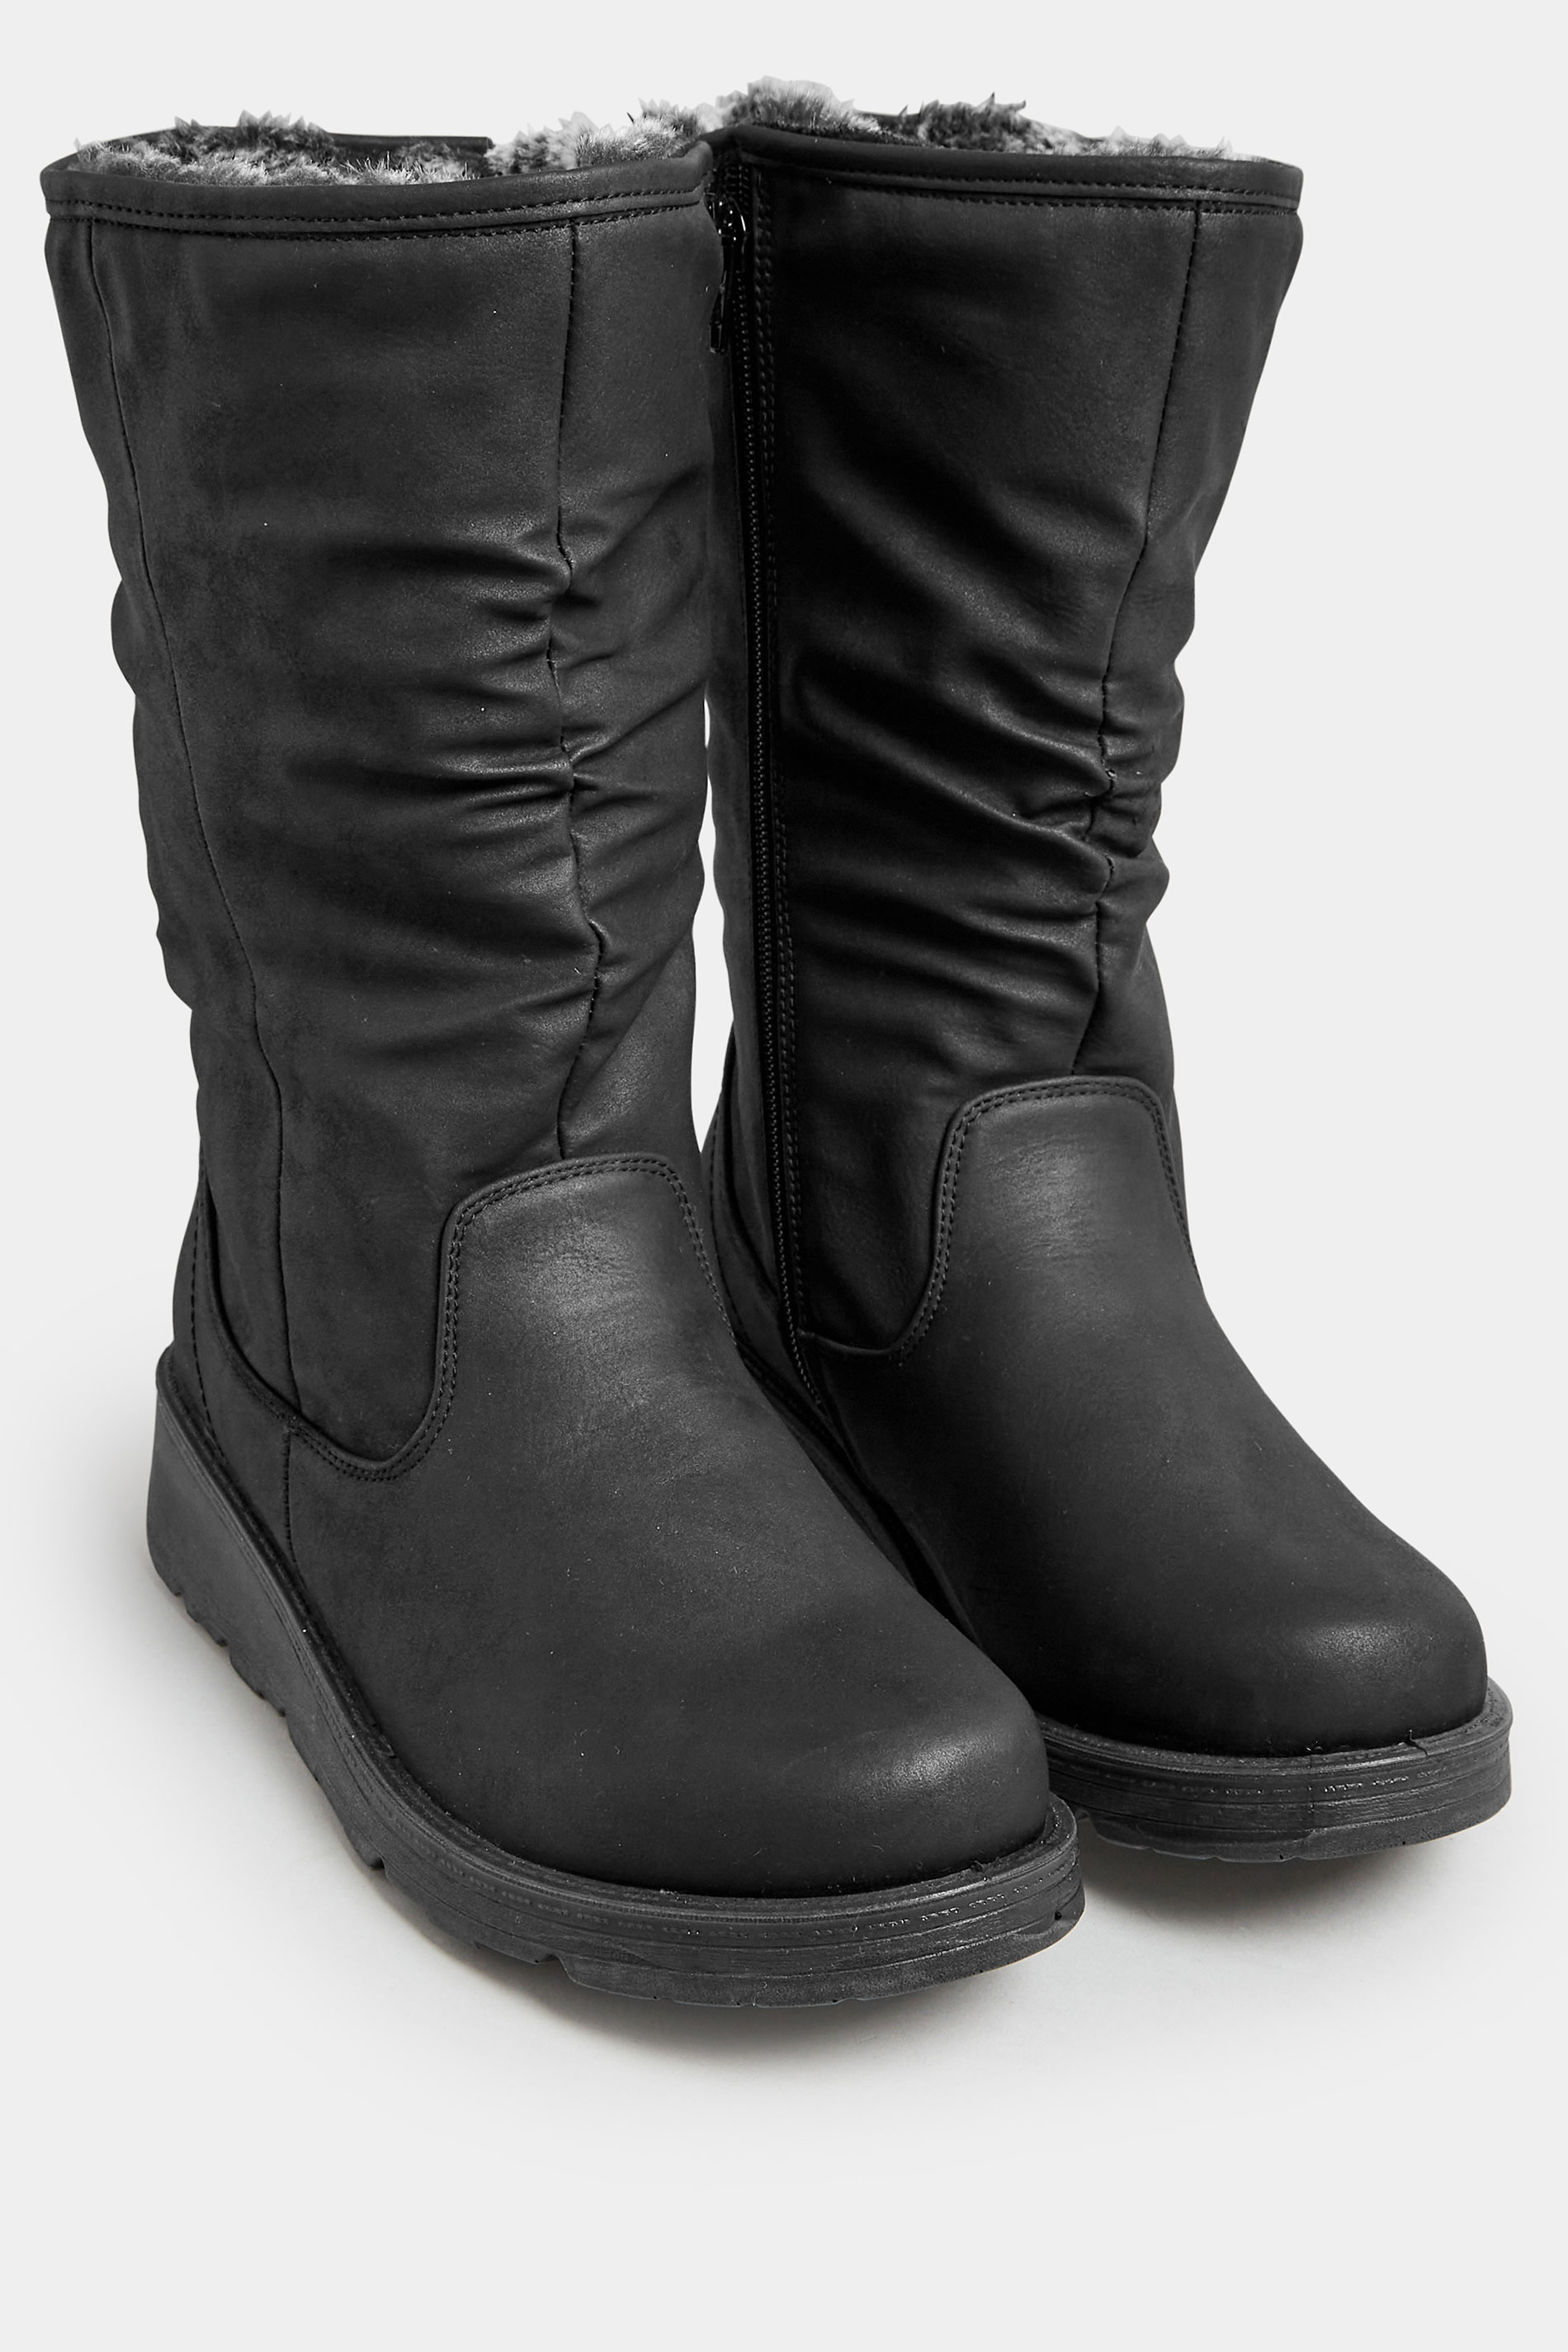 Black Fur Lined Calf Boots In Wide E Fit & Wide EEE Fit | Yours Clothing 2